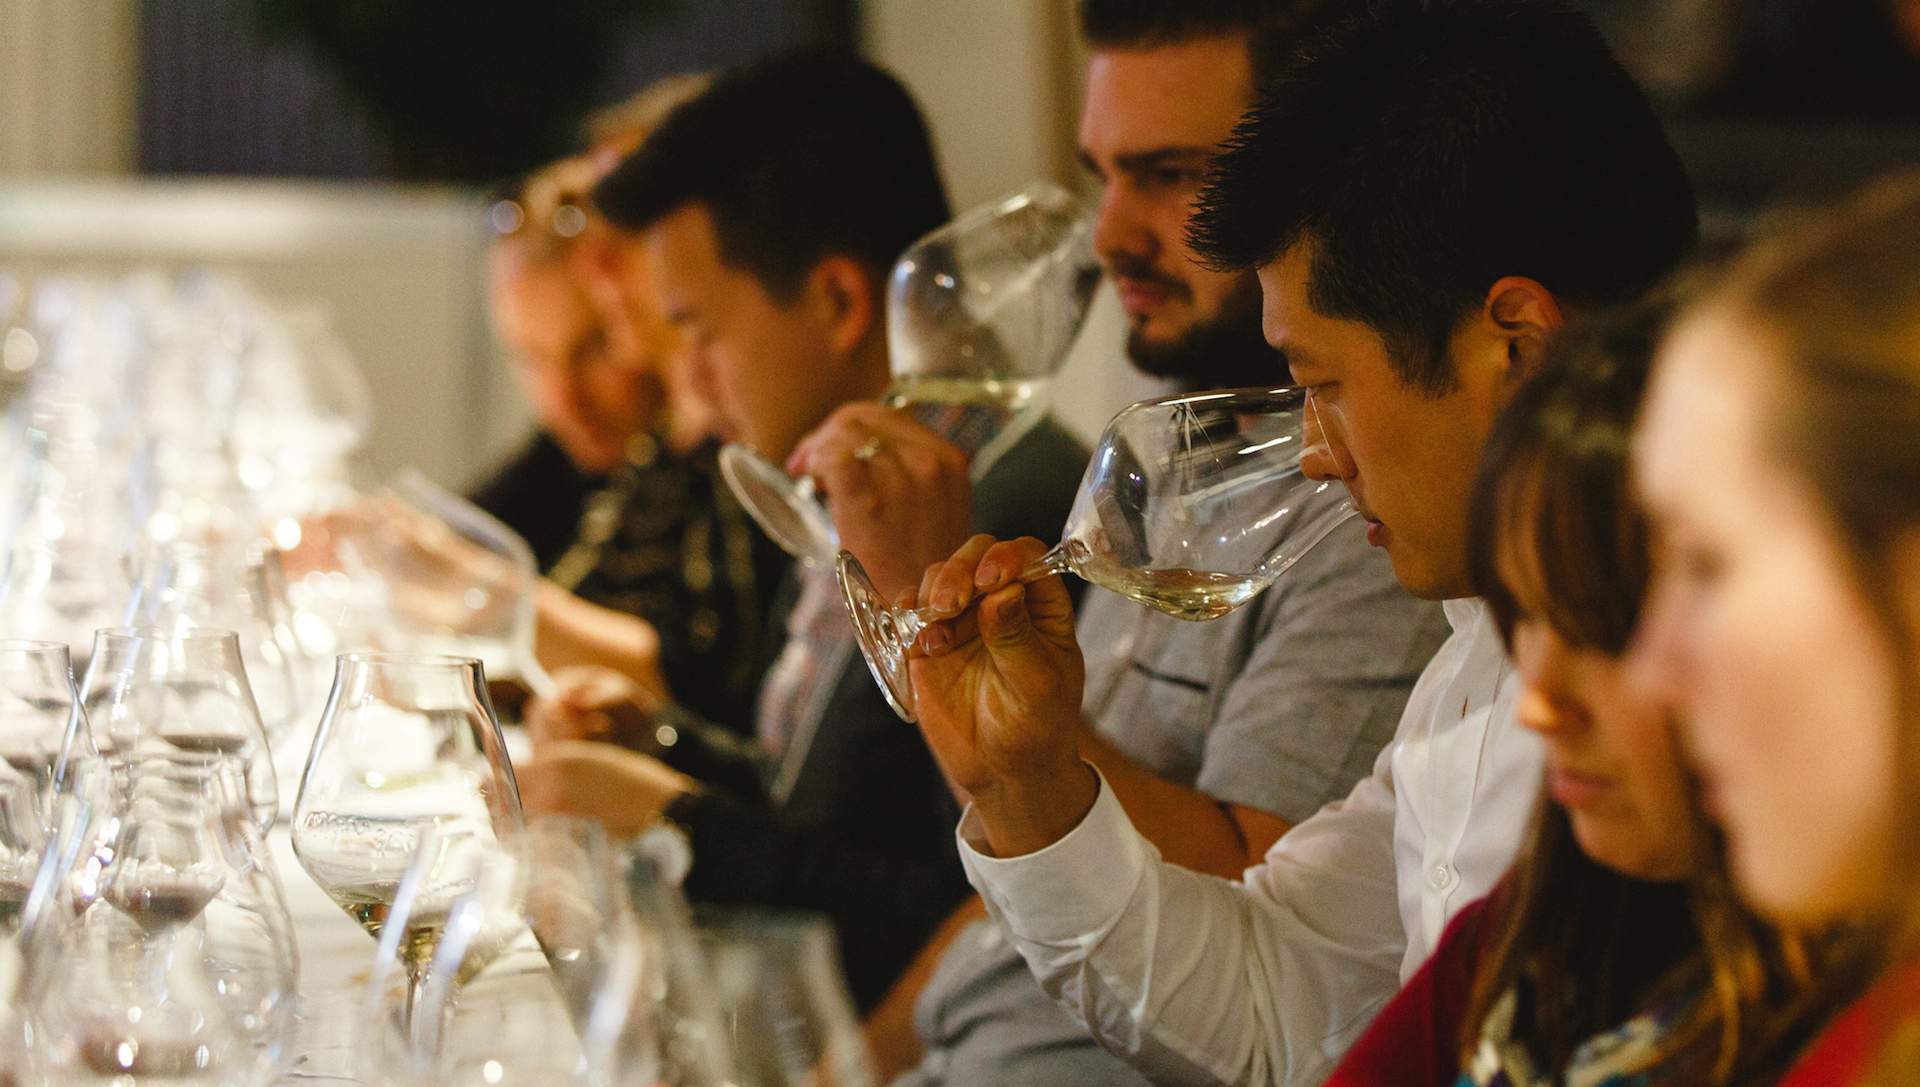 New Zealand's Biggest Wine Tasting Event Returns, Expands to Wellington